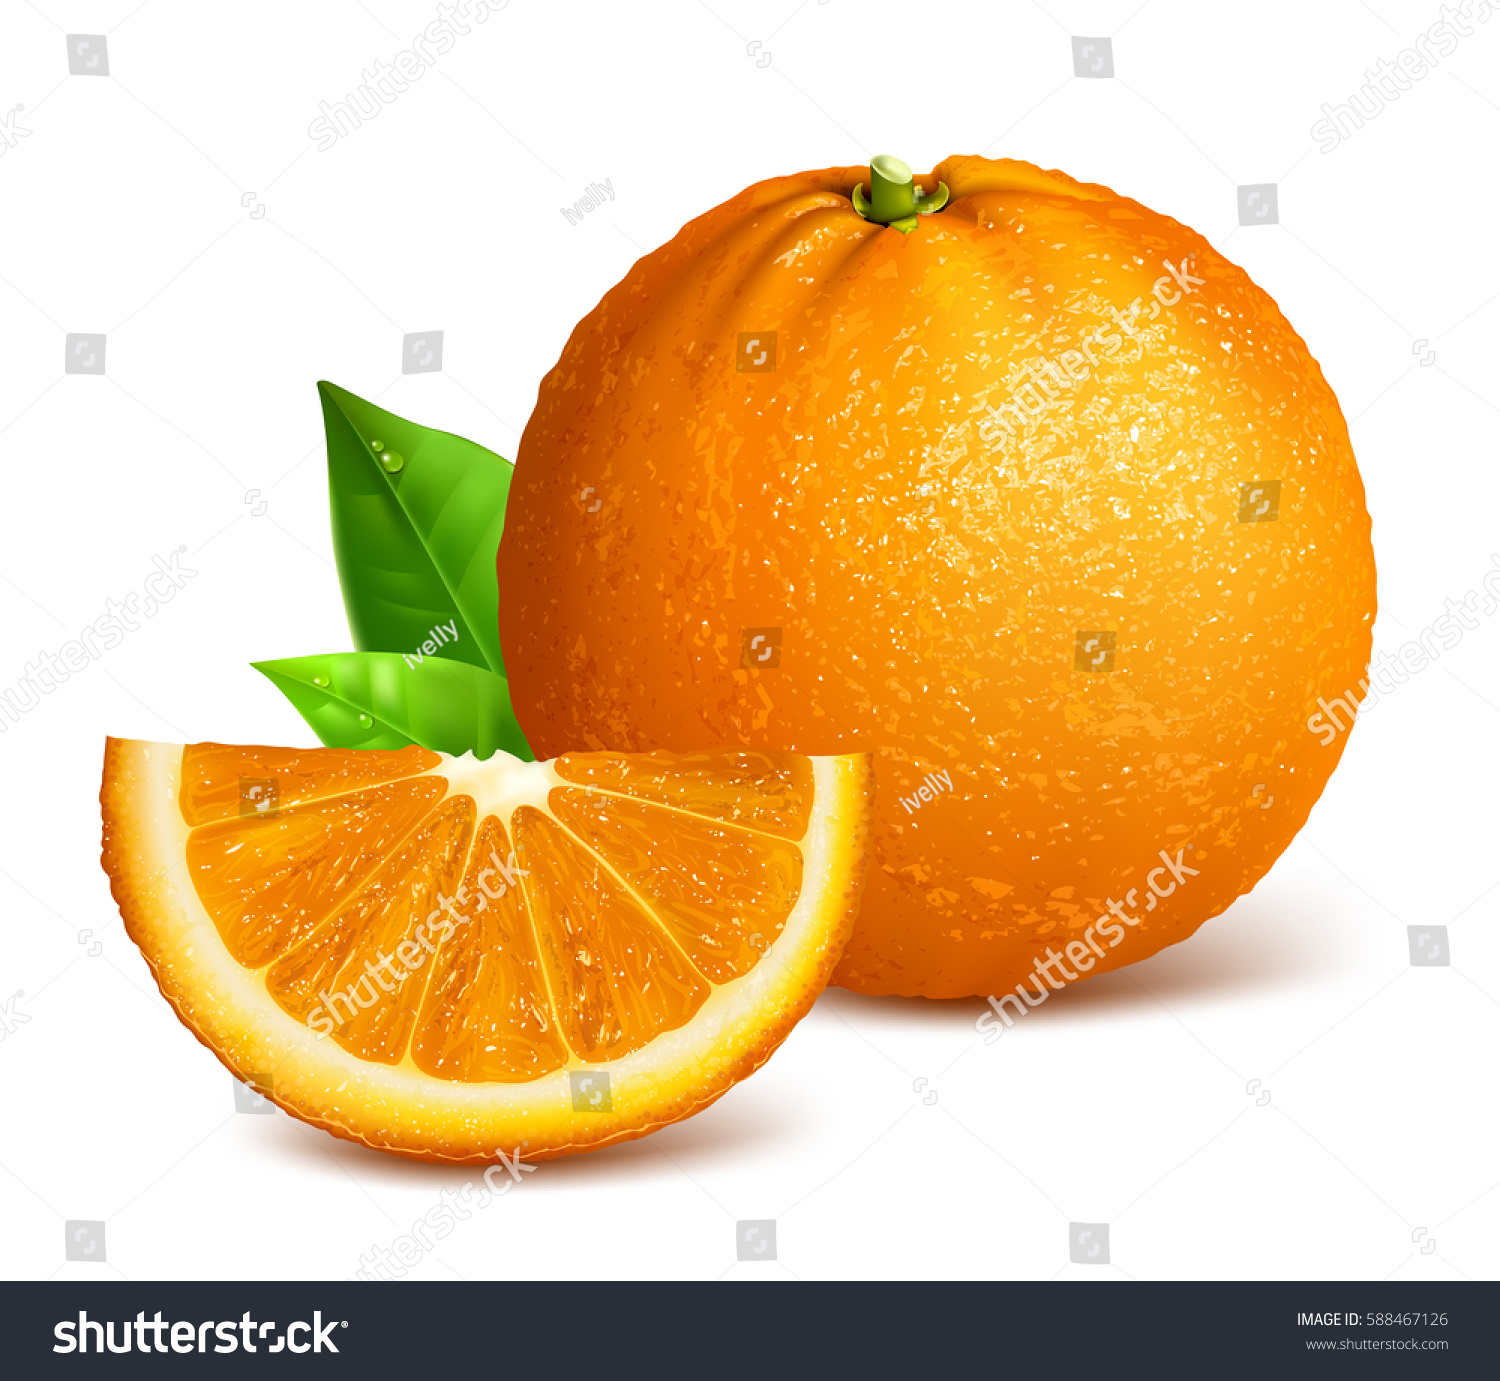 Whole Ripe Oranges Slices Vector Illustration Stock Vector 588467126 ...